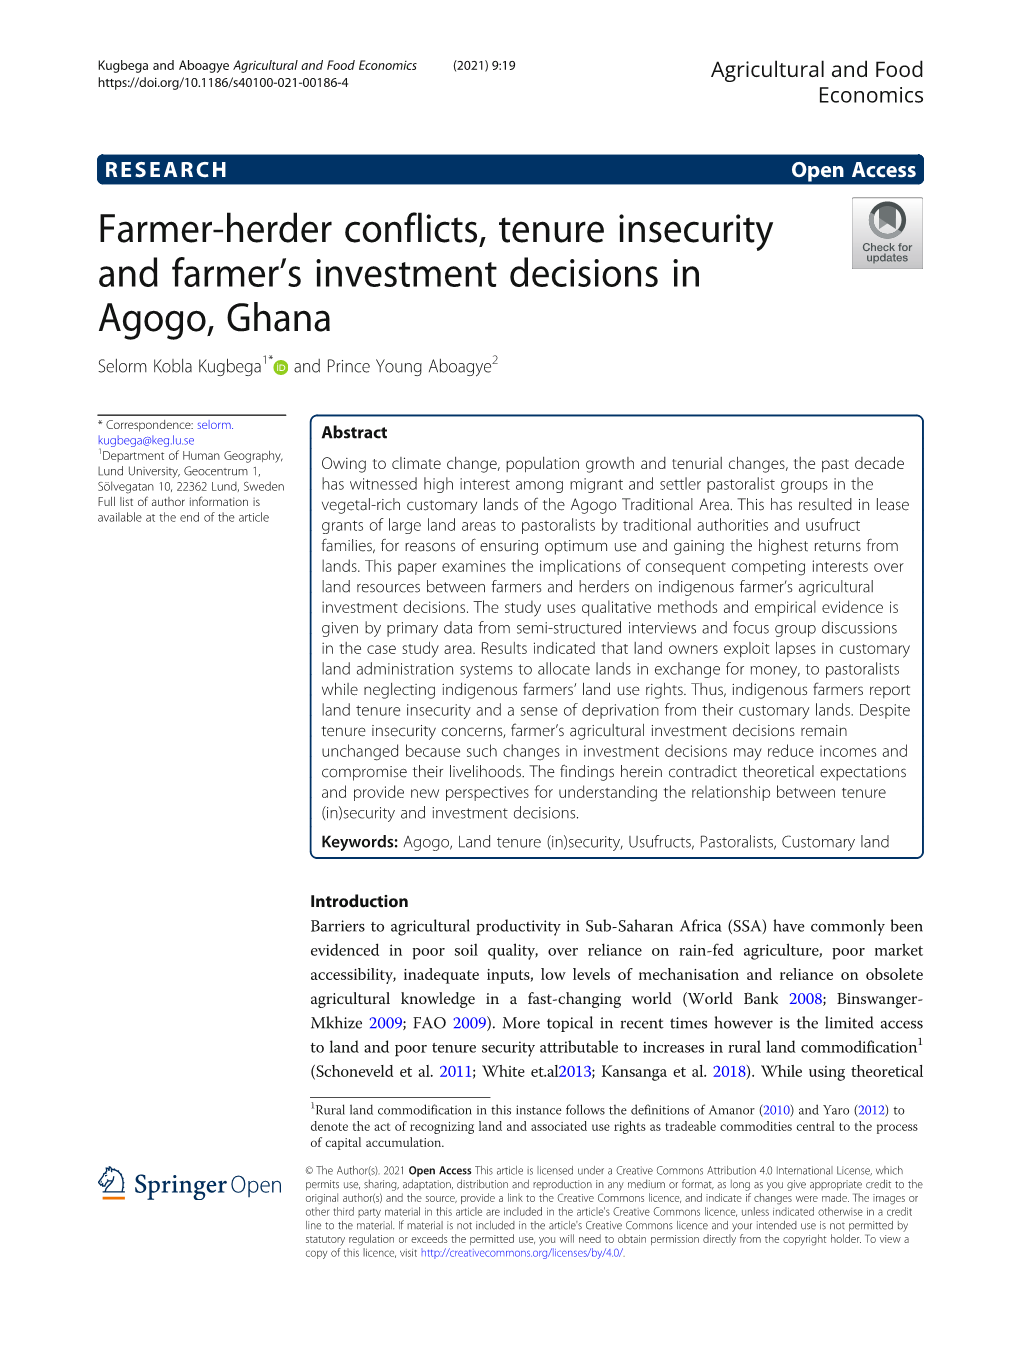 Farmer-Herder Conflicts, Tenure Insecurity and Farmer's Investment